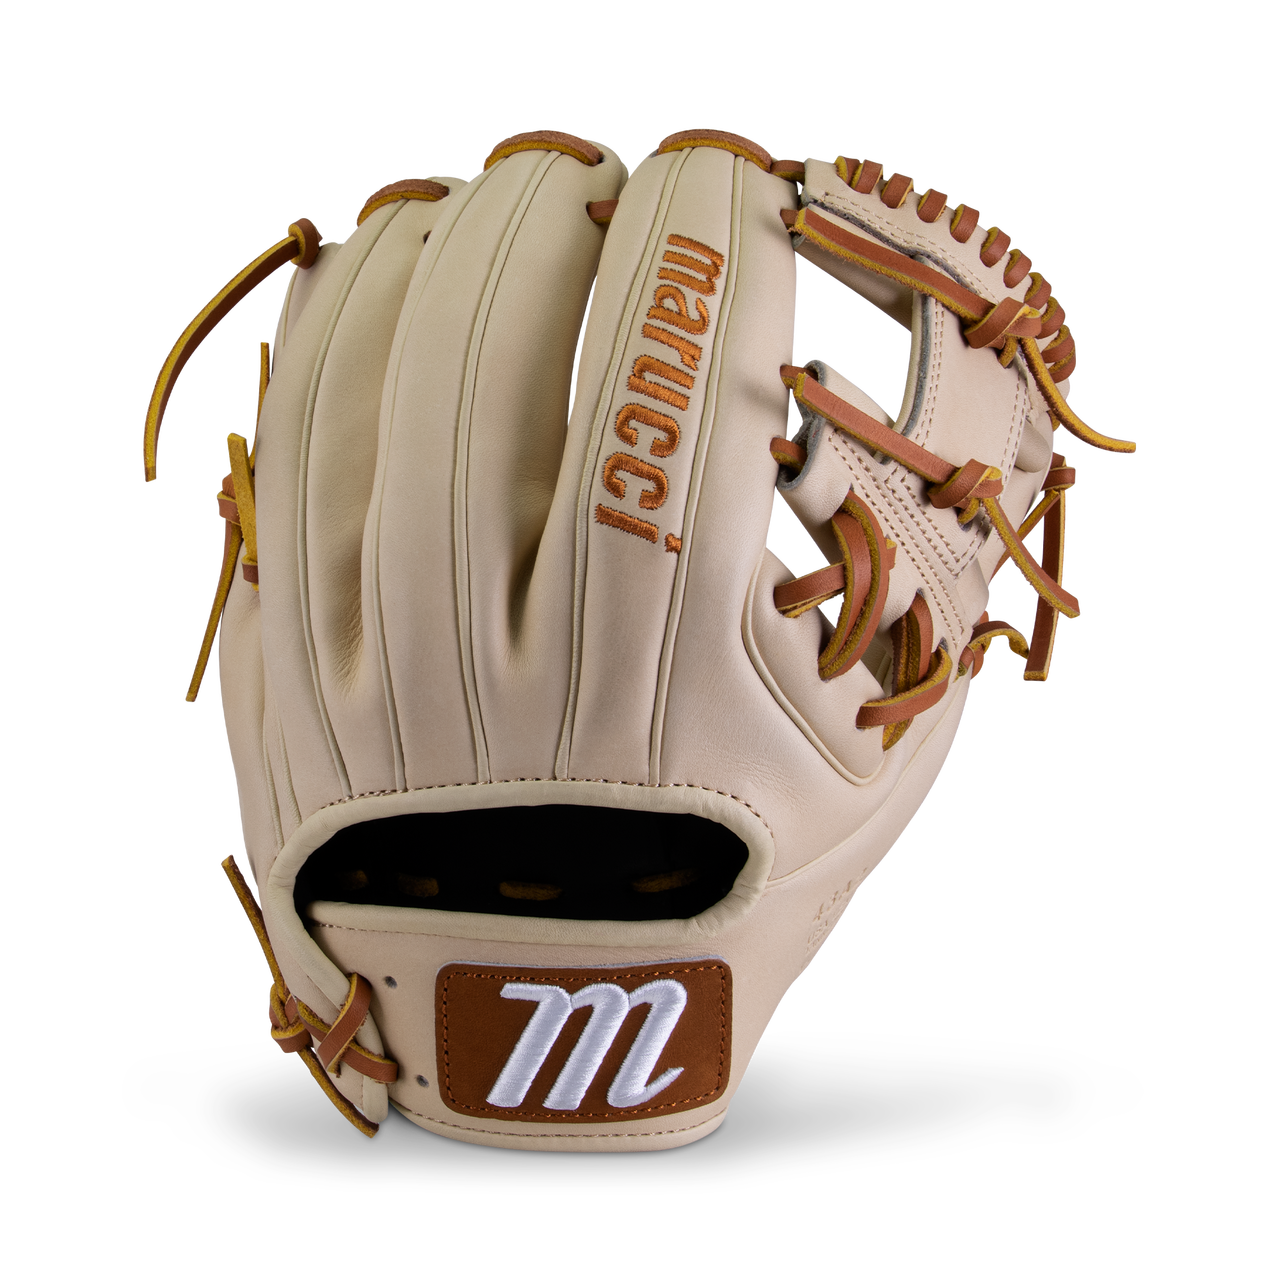 marucci-cypress-m-type-43a2-baseball-glove-11-5-inch-right-hand-throw MFGCYM43A2-CMTF-RightHandThrow   <h1 class=productView-title-lower>CYPRESS M TYPE 43A2 11.5 I-WEB</h1> <p><span><em>M Type</em> fit system provides